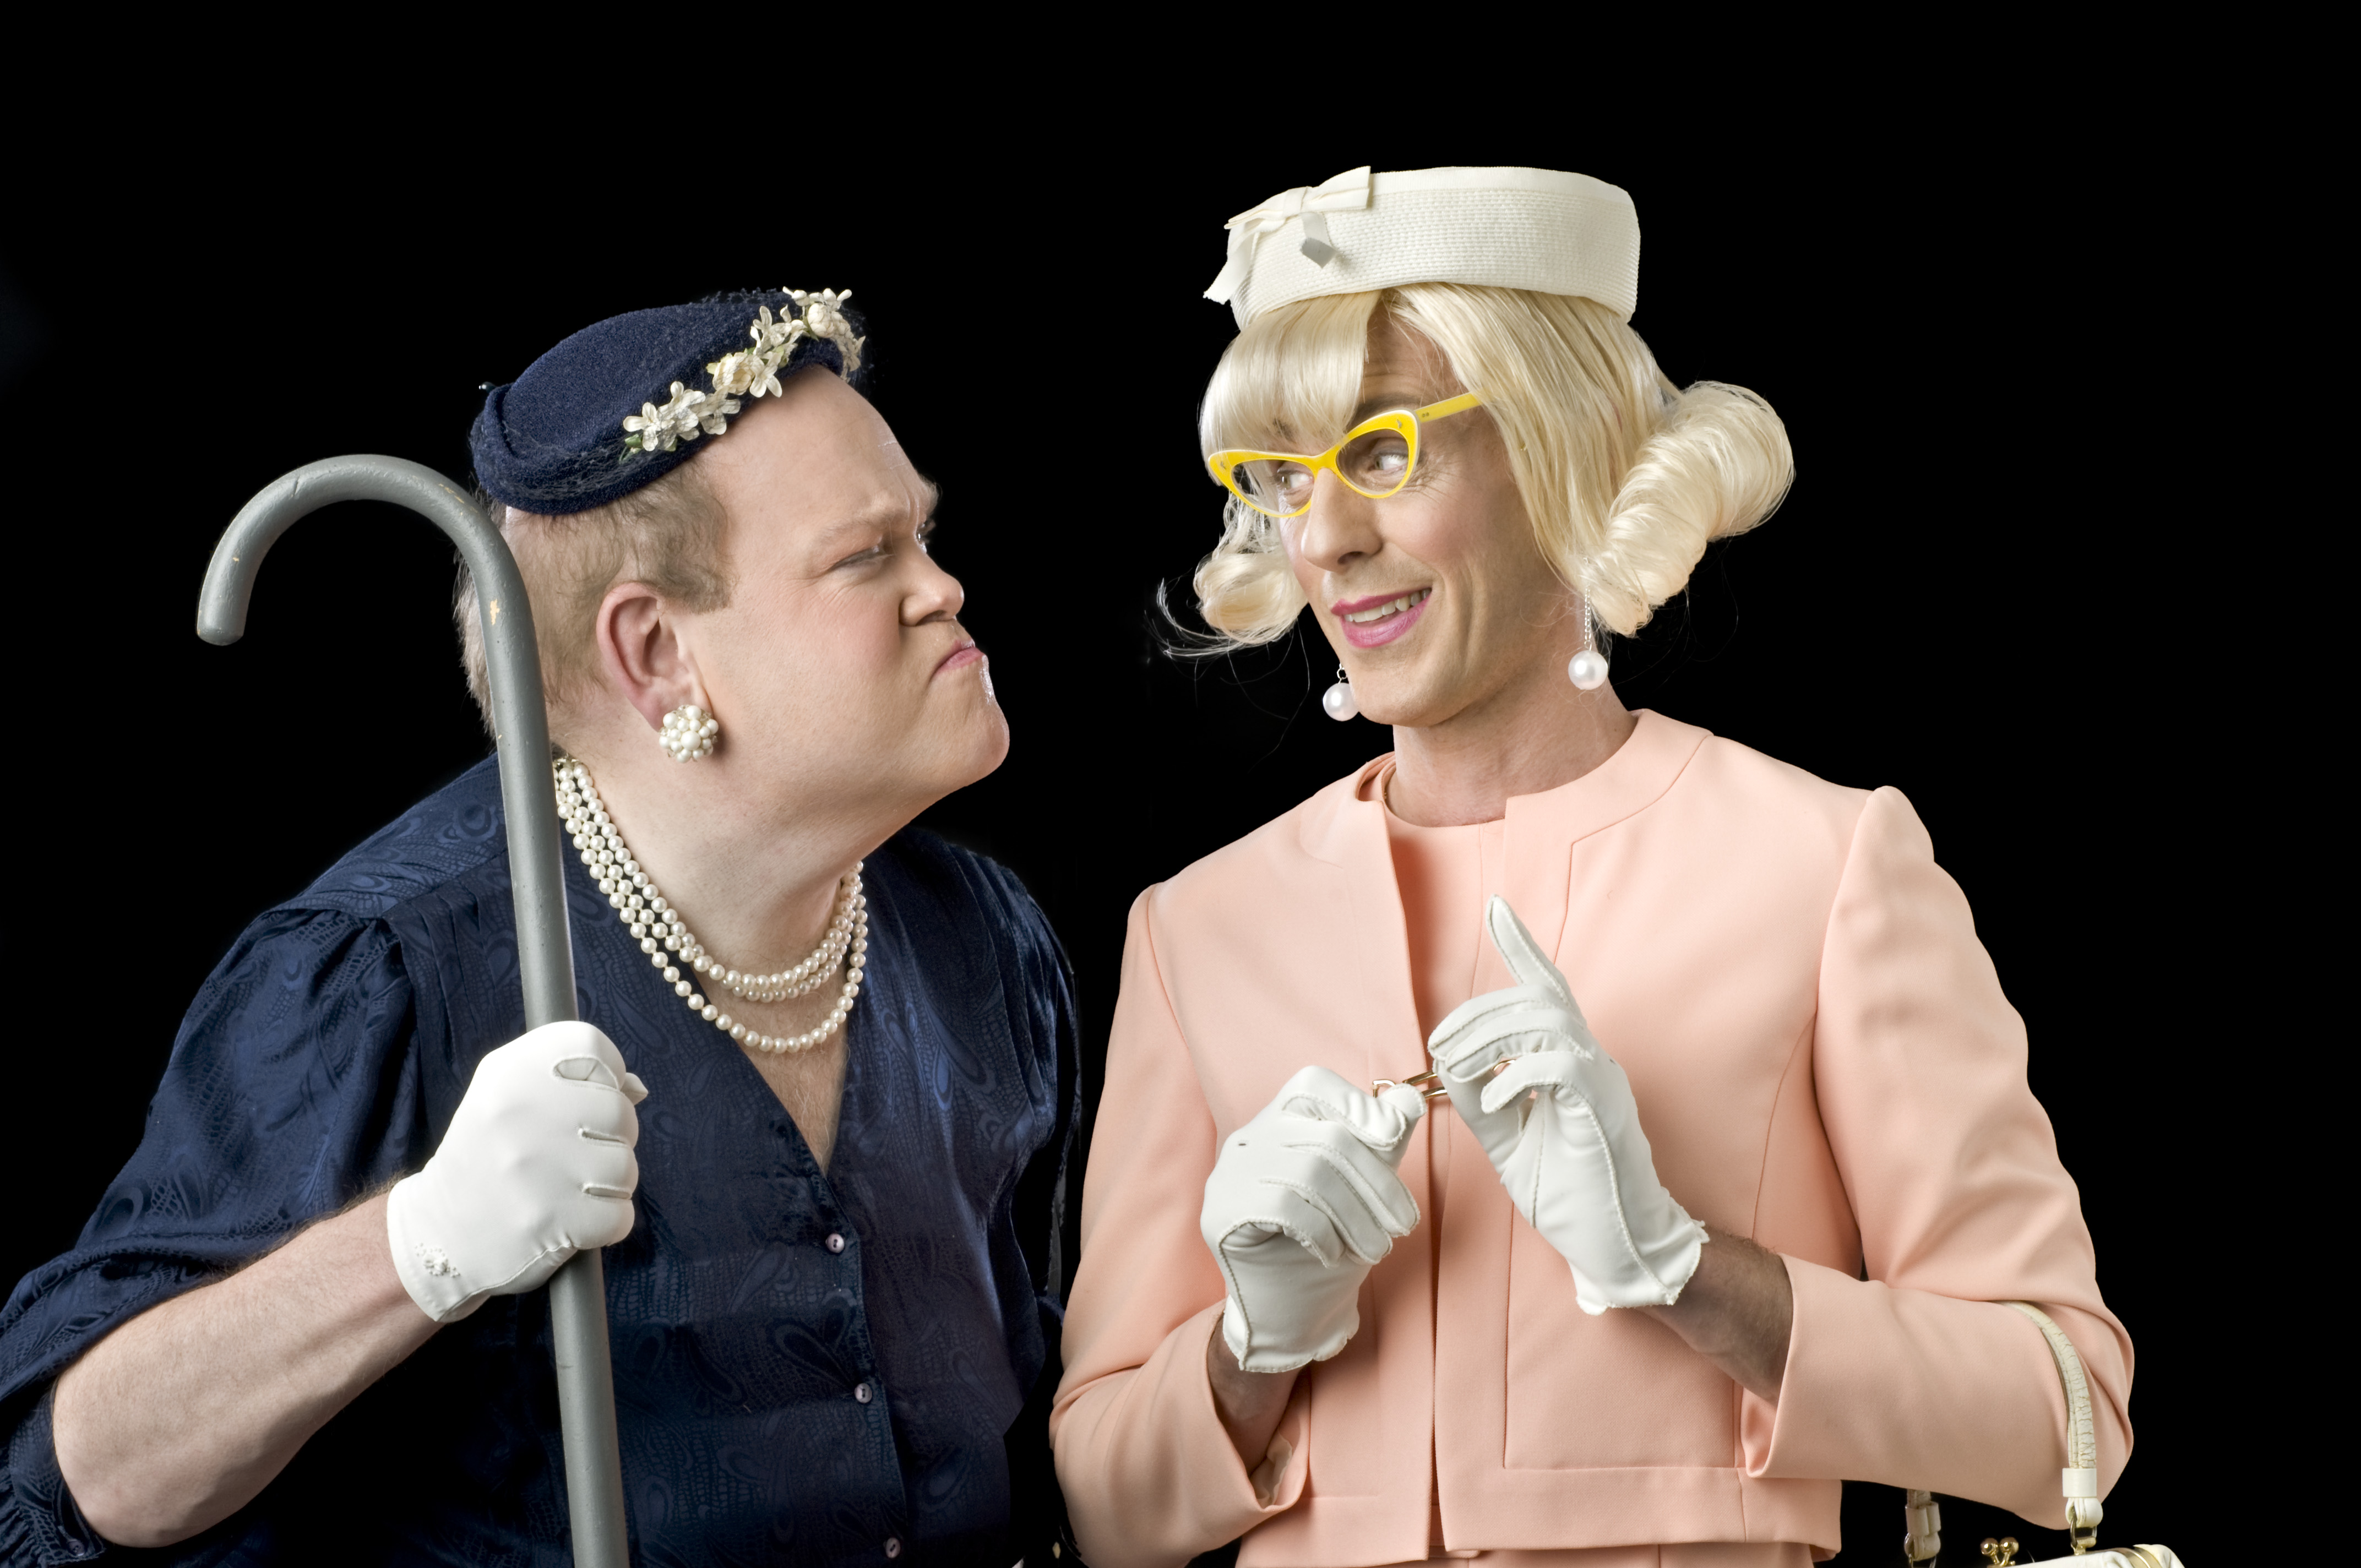 Evan Bridenstine as Pearl Burras (left) and John Paul Scheidler as Vera Carp (right) look at each other in their costumes